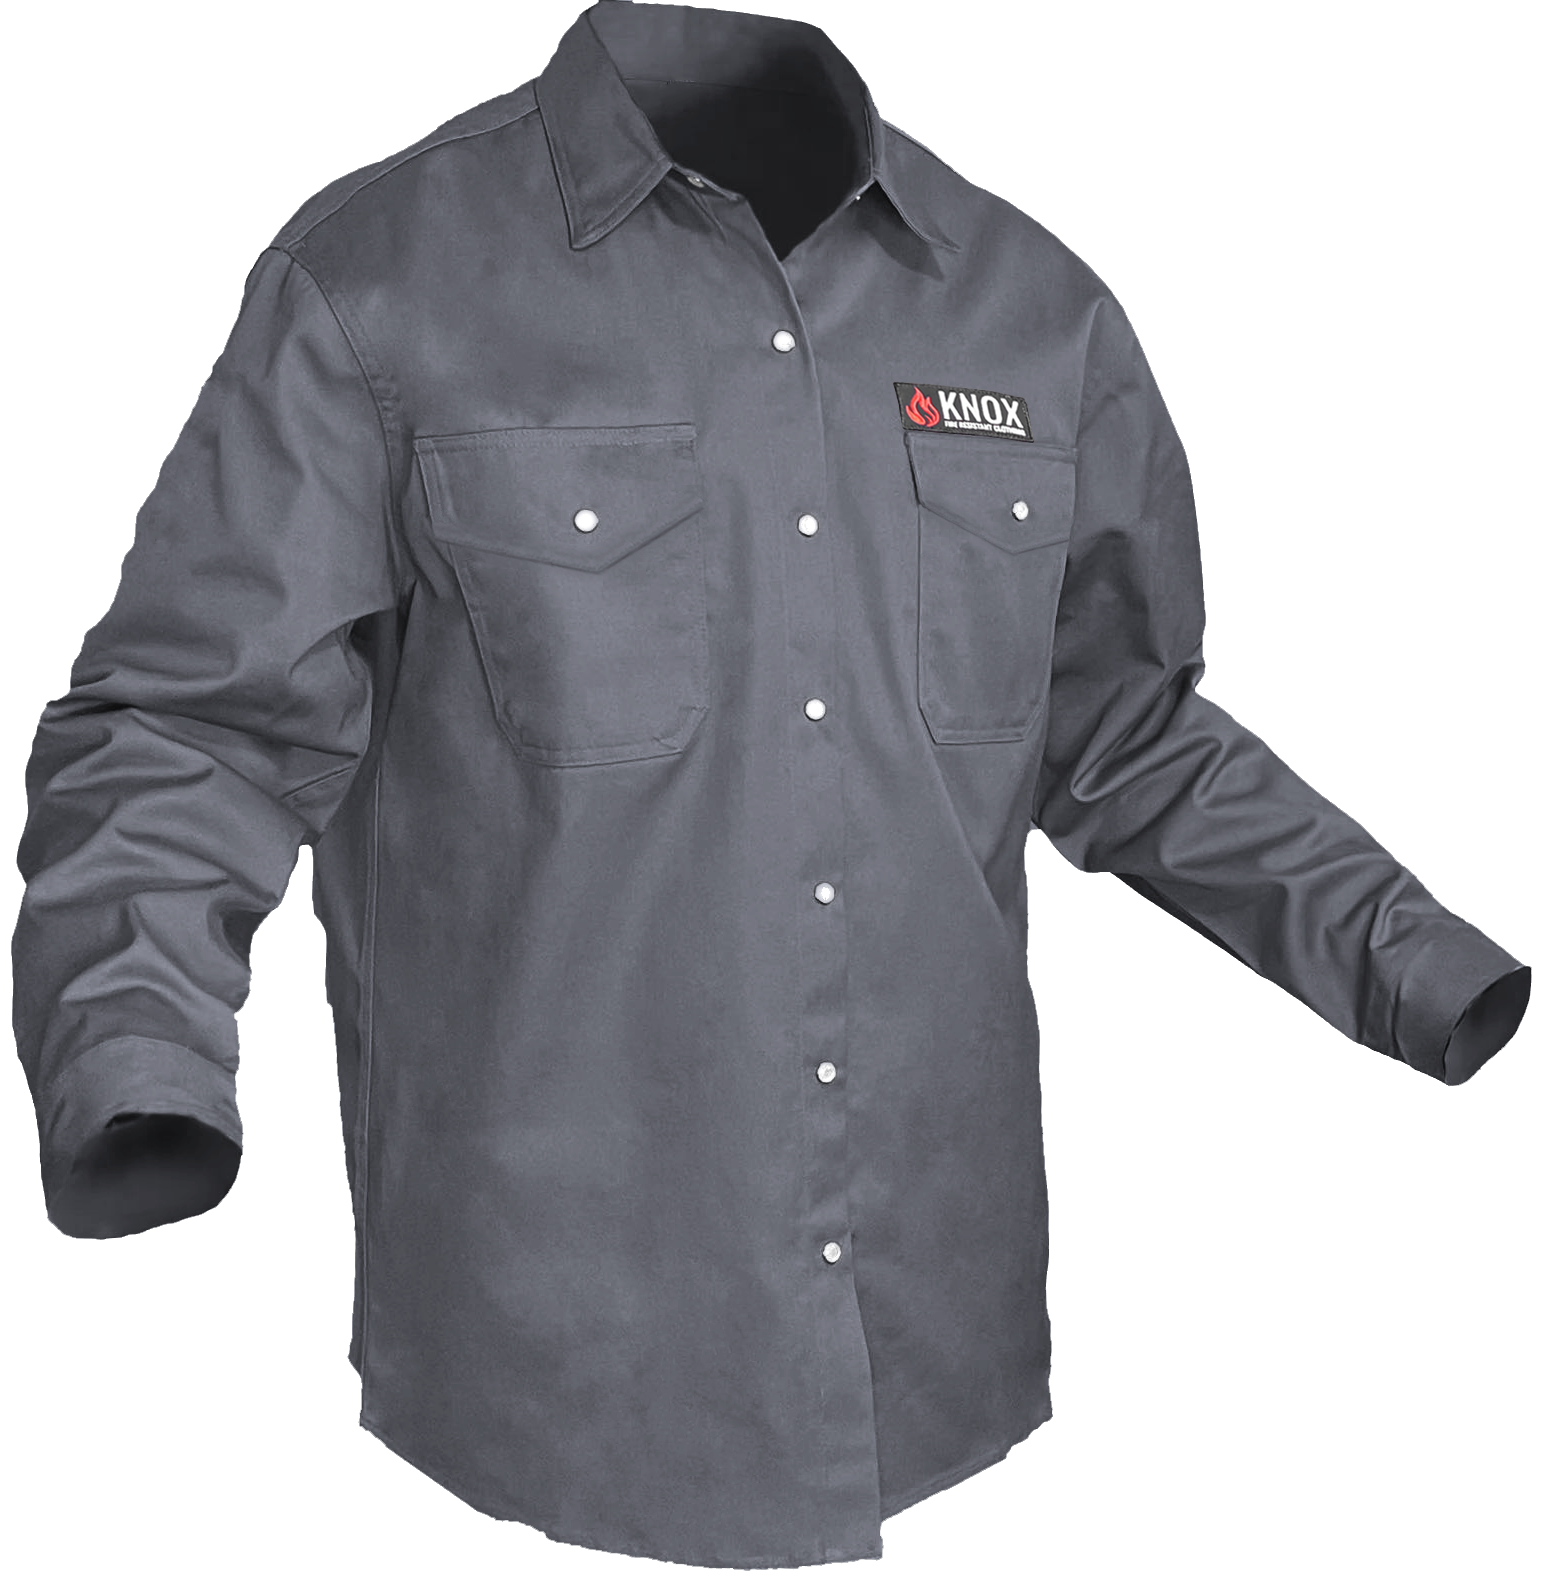 Knox FR Shirt Gray With Pearl Snap Buttons